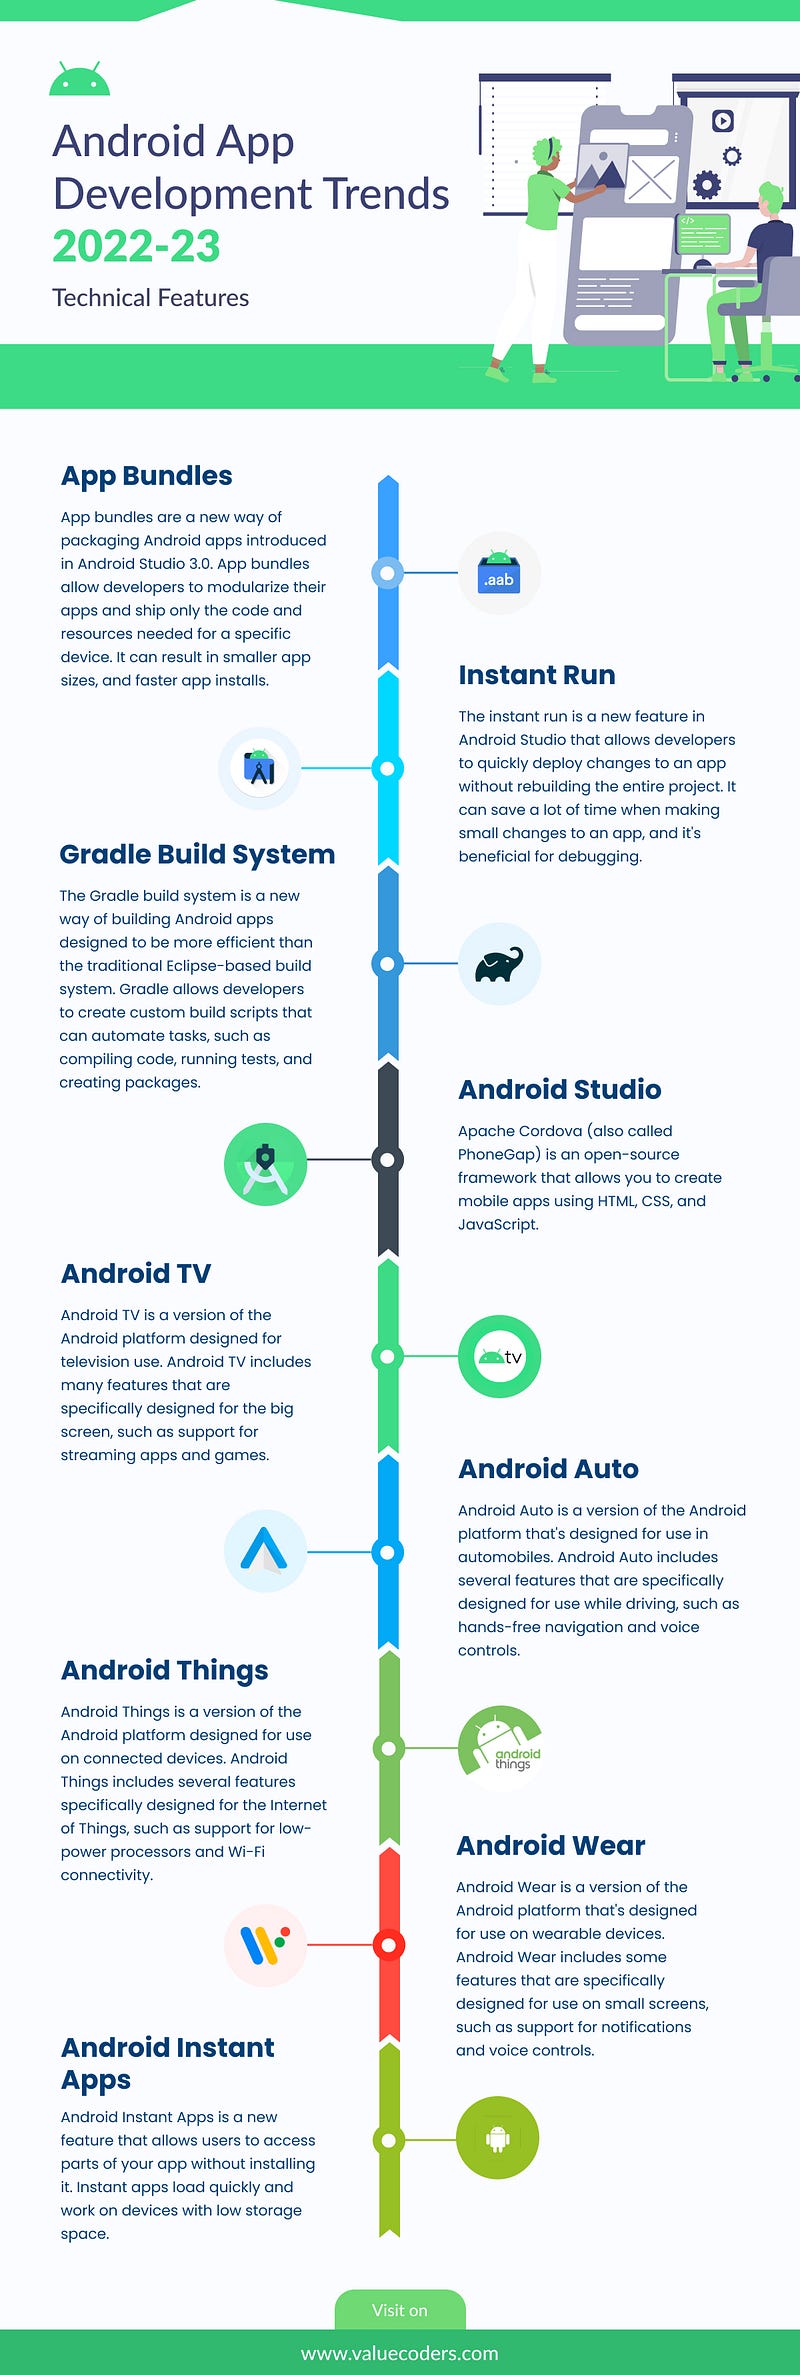 Top Android App Development Trends To Look For